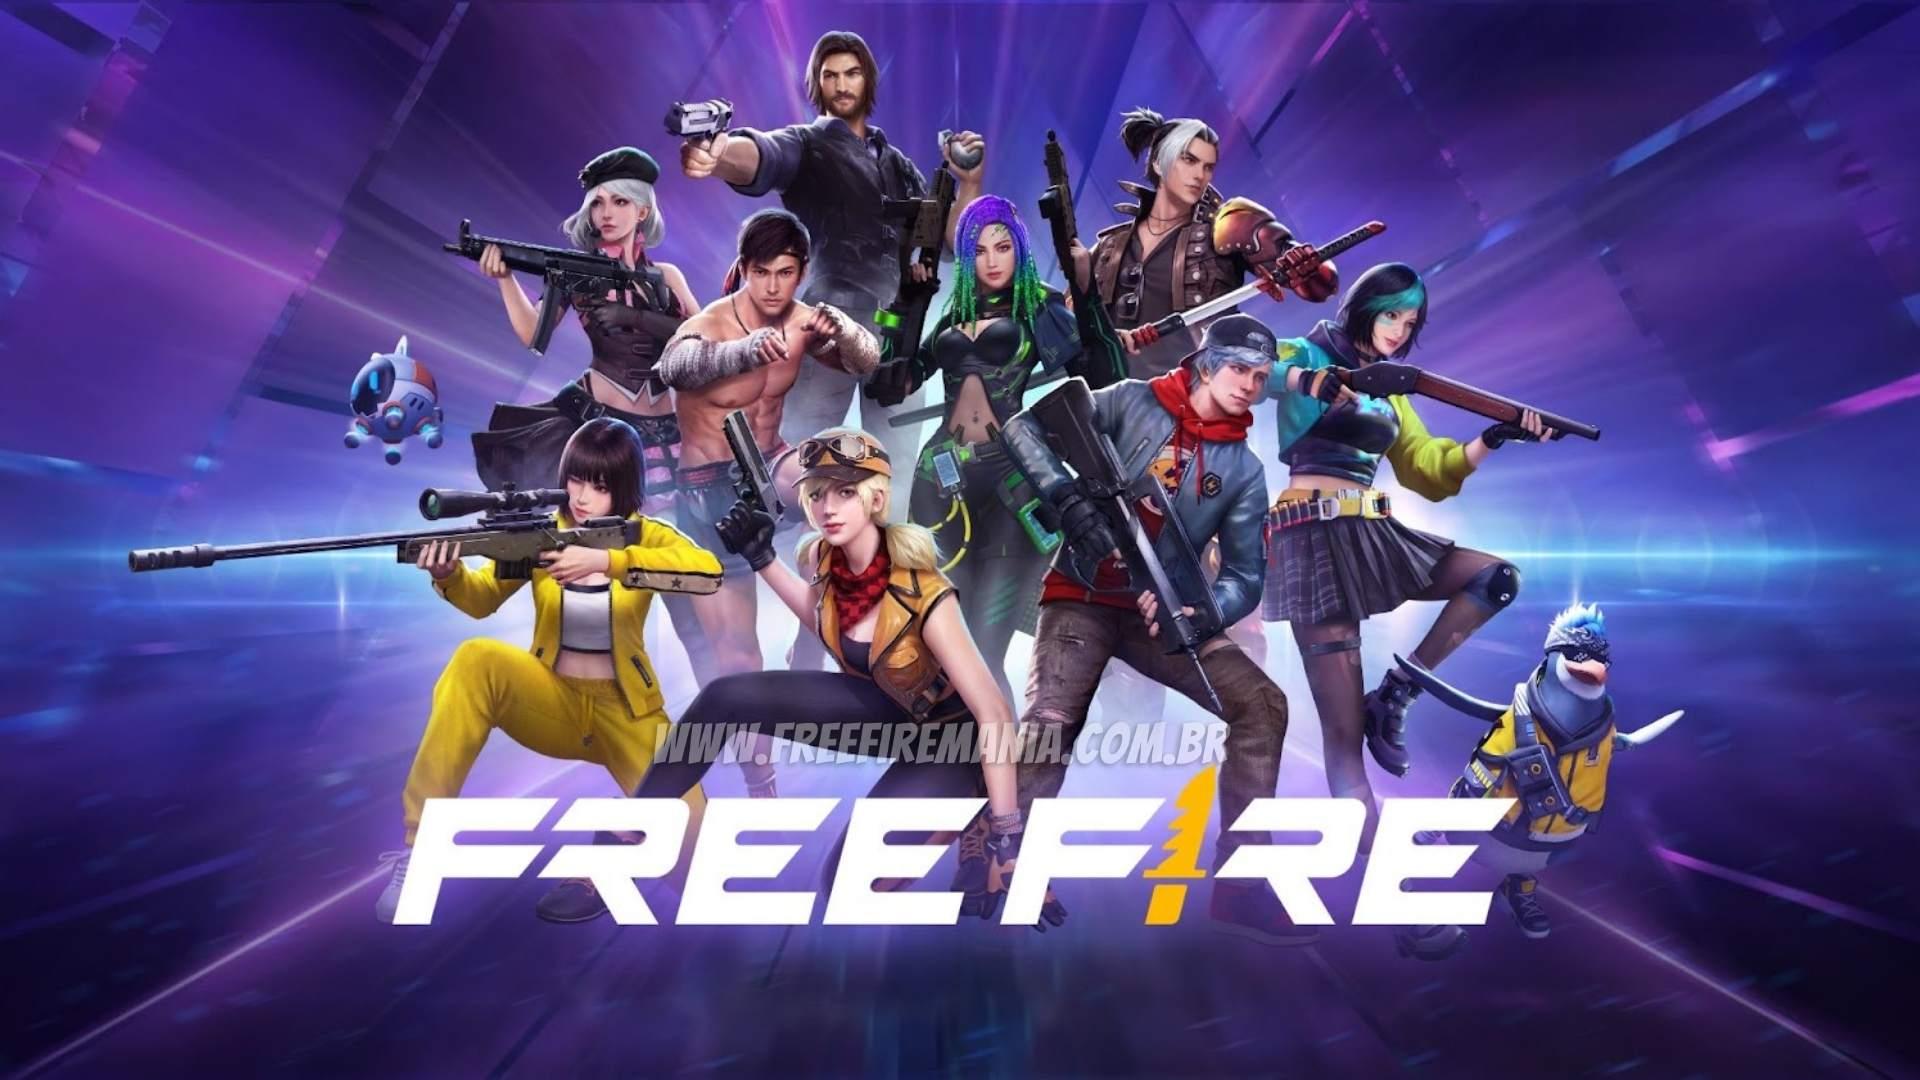 Exclusive: Garena presents new brand and logo for Free Fire